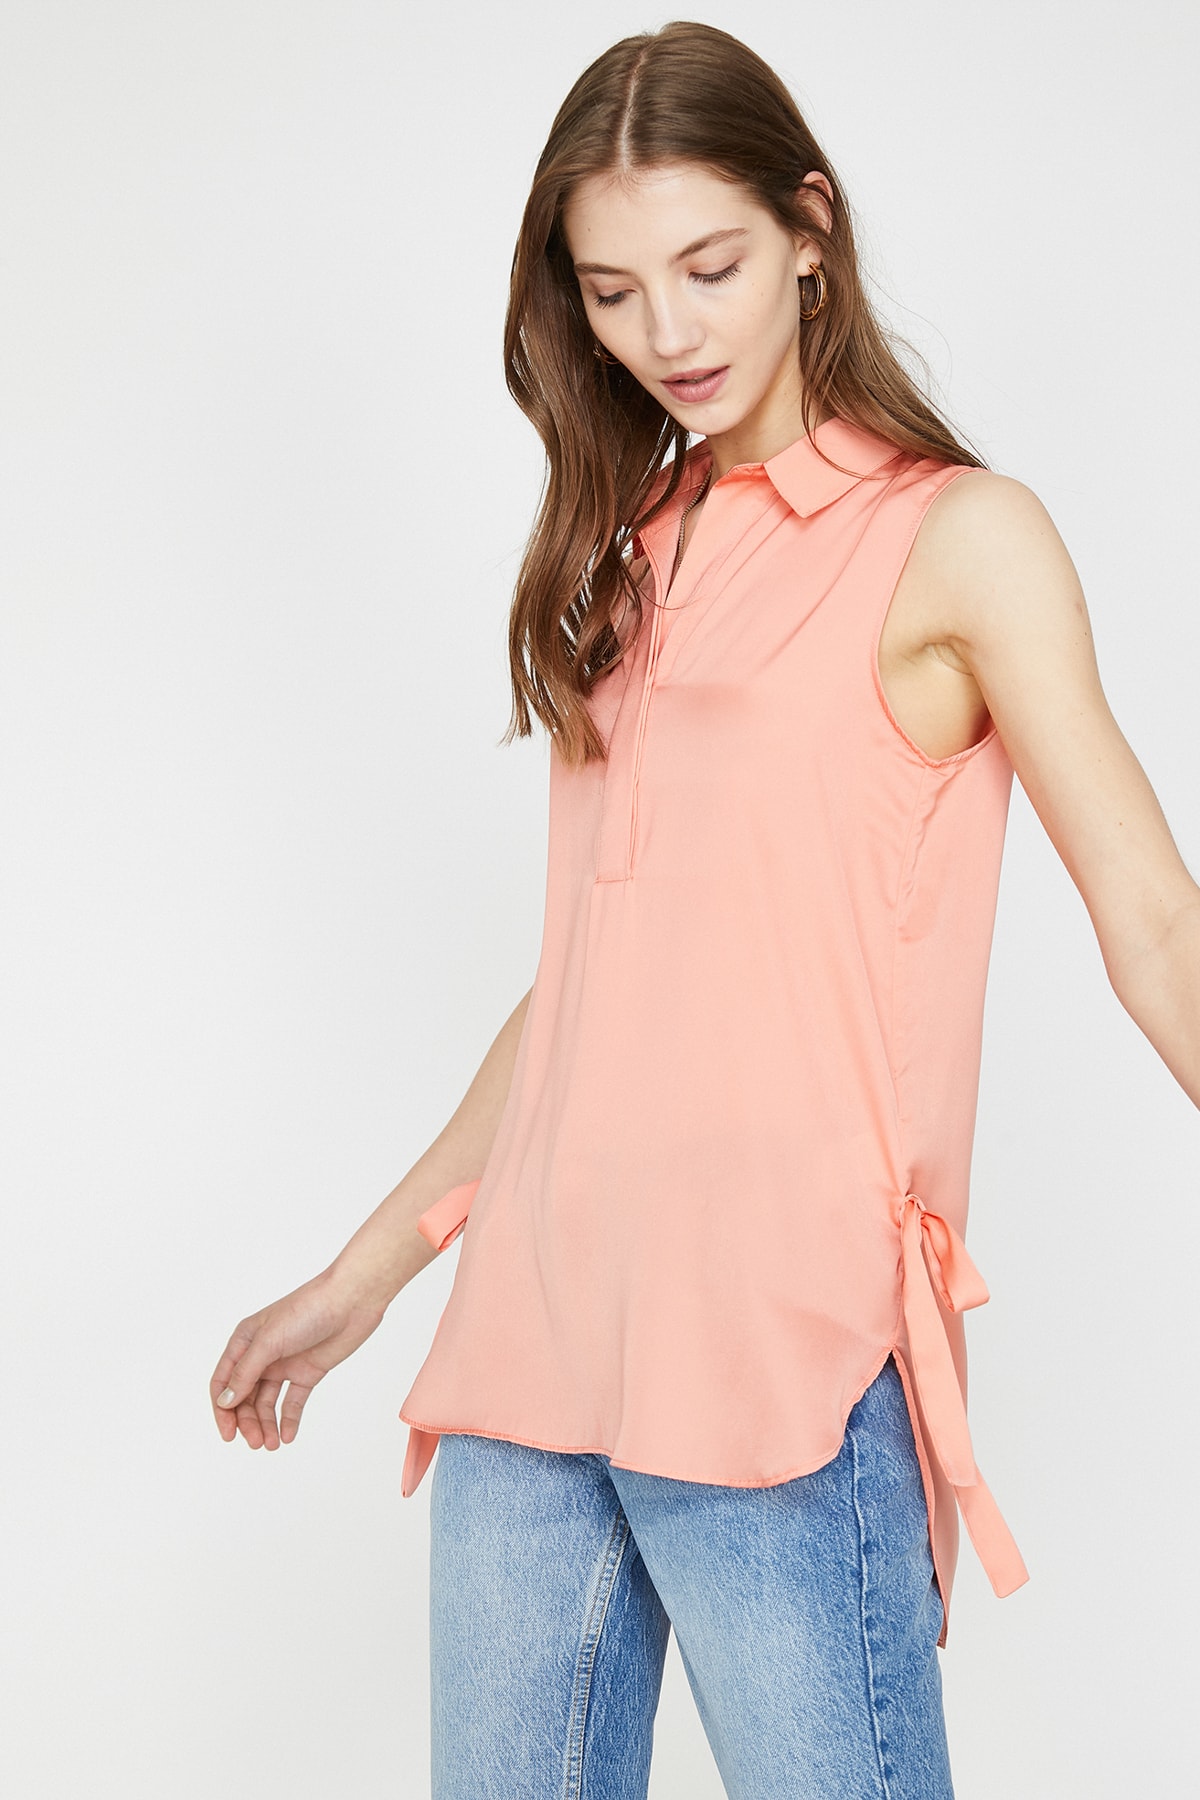 Levně Koton Women's Salmon Colored Classic Collar Sleeveless Tunic with Tie Details.